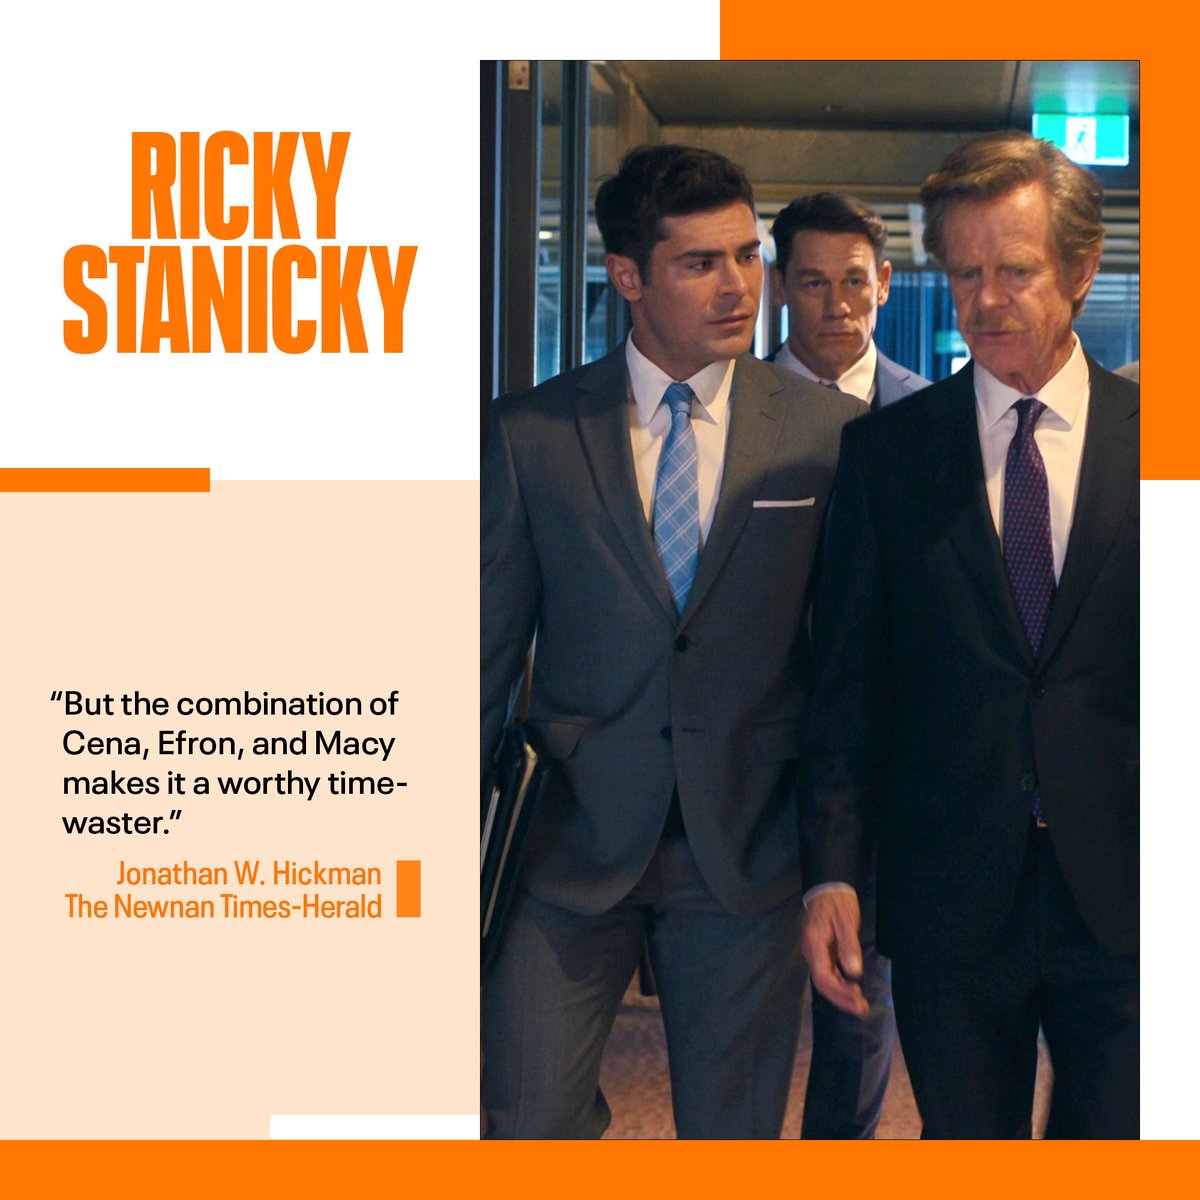 'But the combination of Cena, Efron, and Macy makes it a worthy time-waster.'

#RickyStanicky #ZacEfron